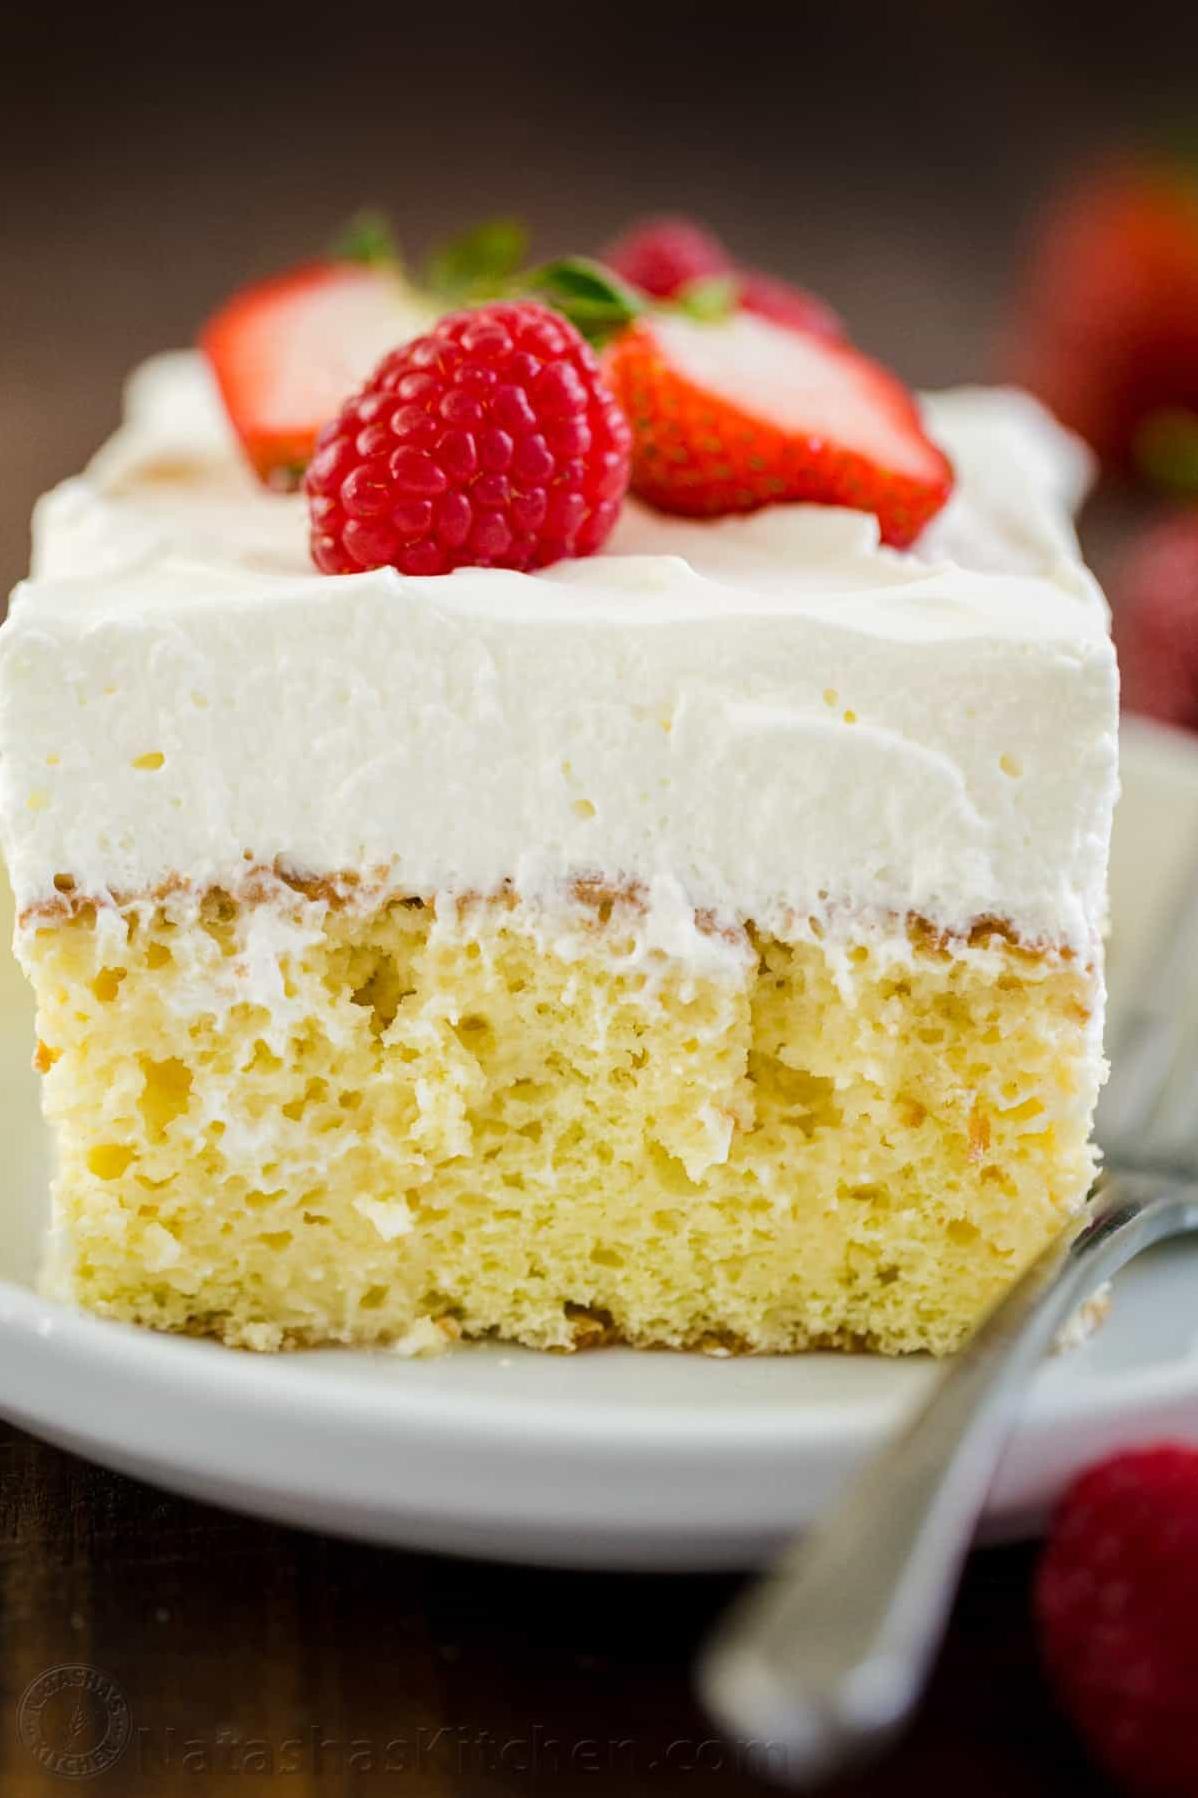  Simple ingredients, stunning results: Nicaraguan tres leches cake